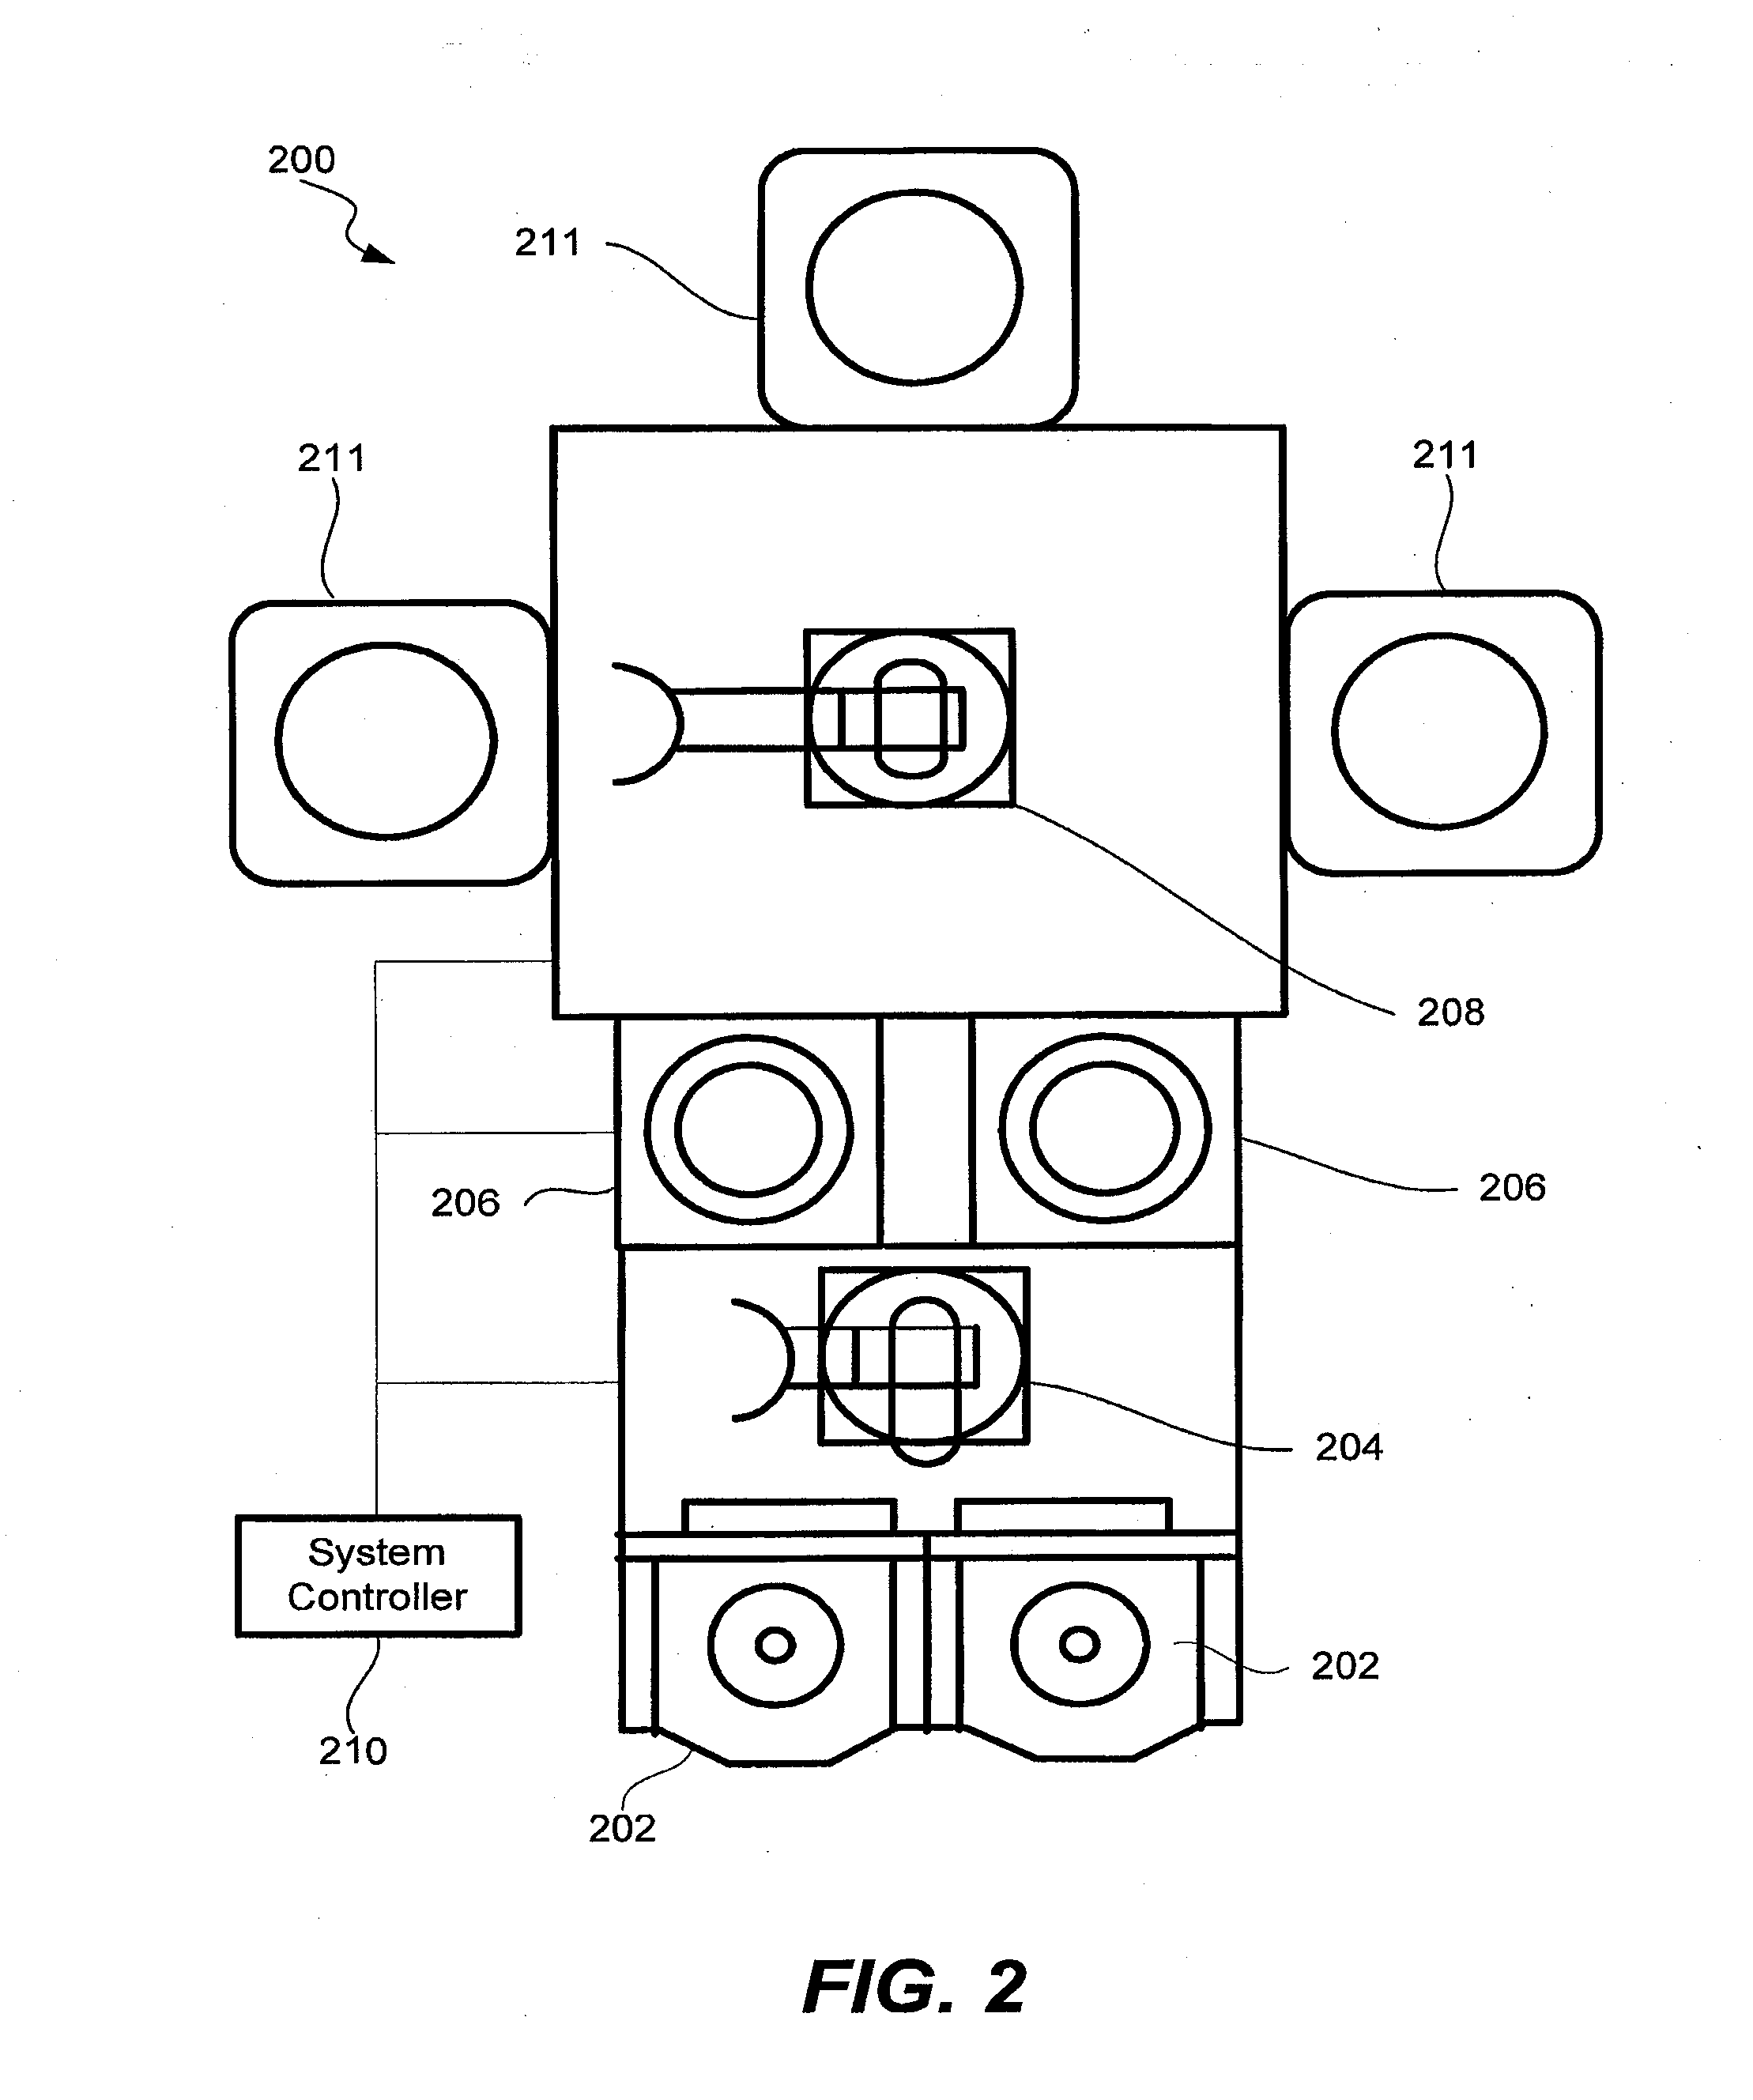 Minimum contact area wafer clamping with gas flow for rapid wafer cooling